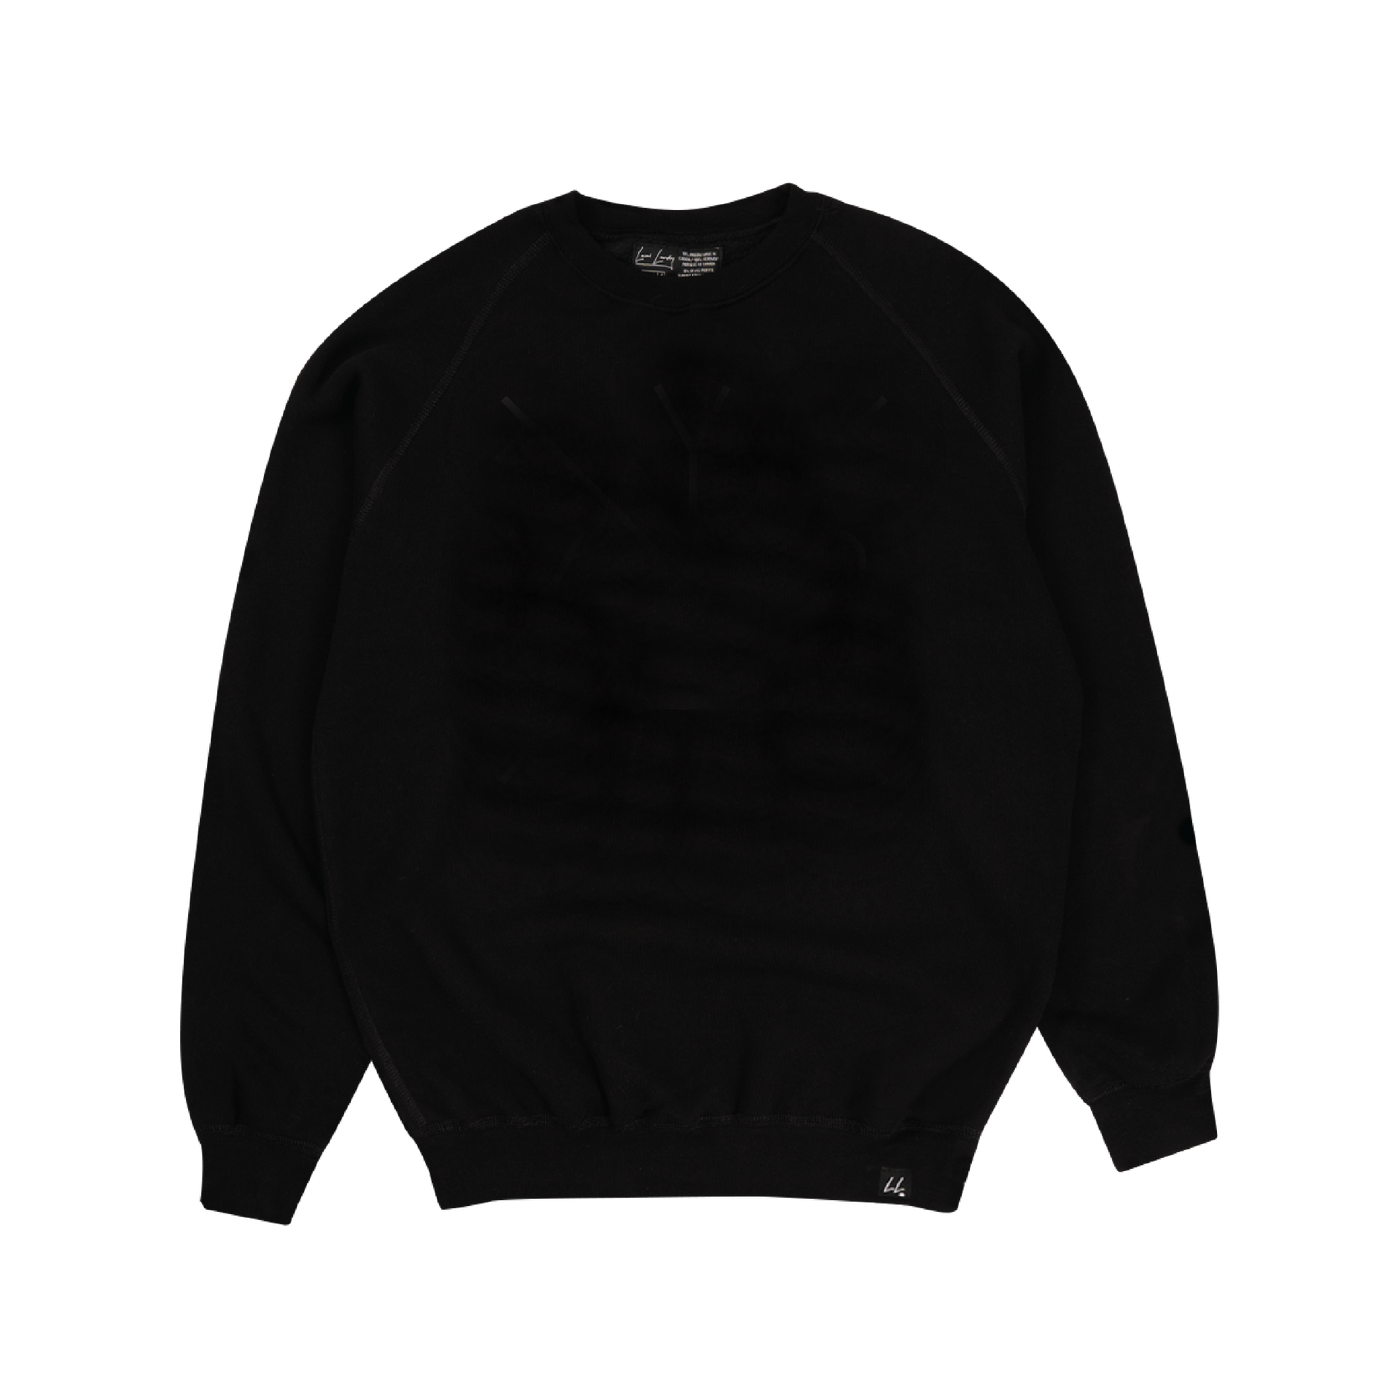 The Local Laundry Raglan Bamboo Sweater in black. This sweater features raglan construction for better mobility in the shoulders. This piece is constructed using sustainable conscious bamboo fabric. Made in Canada.